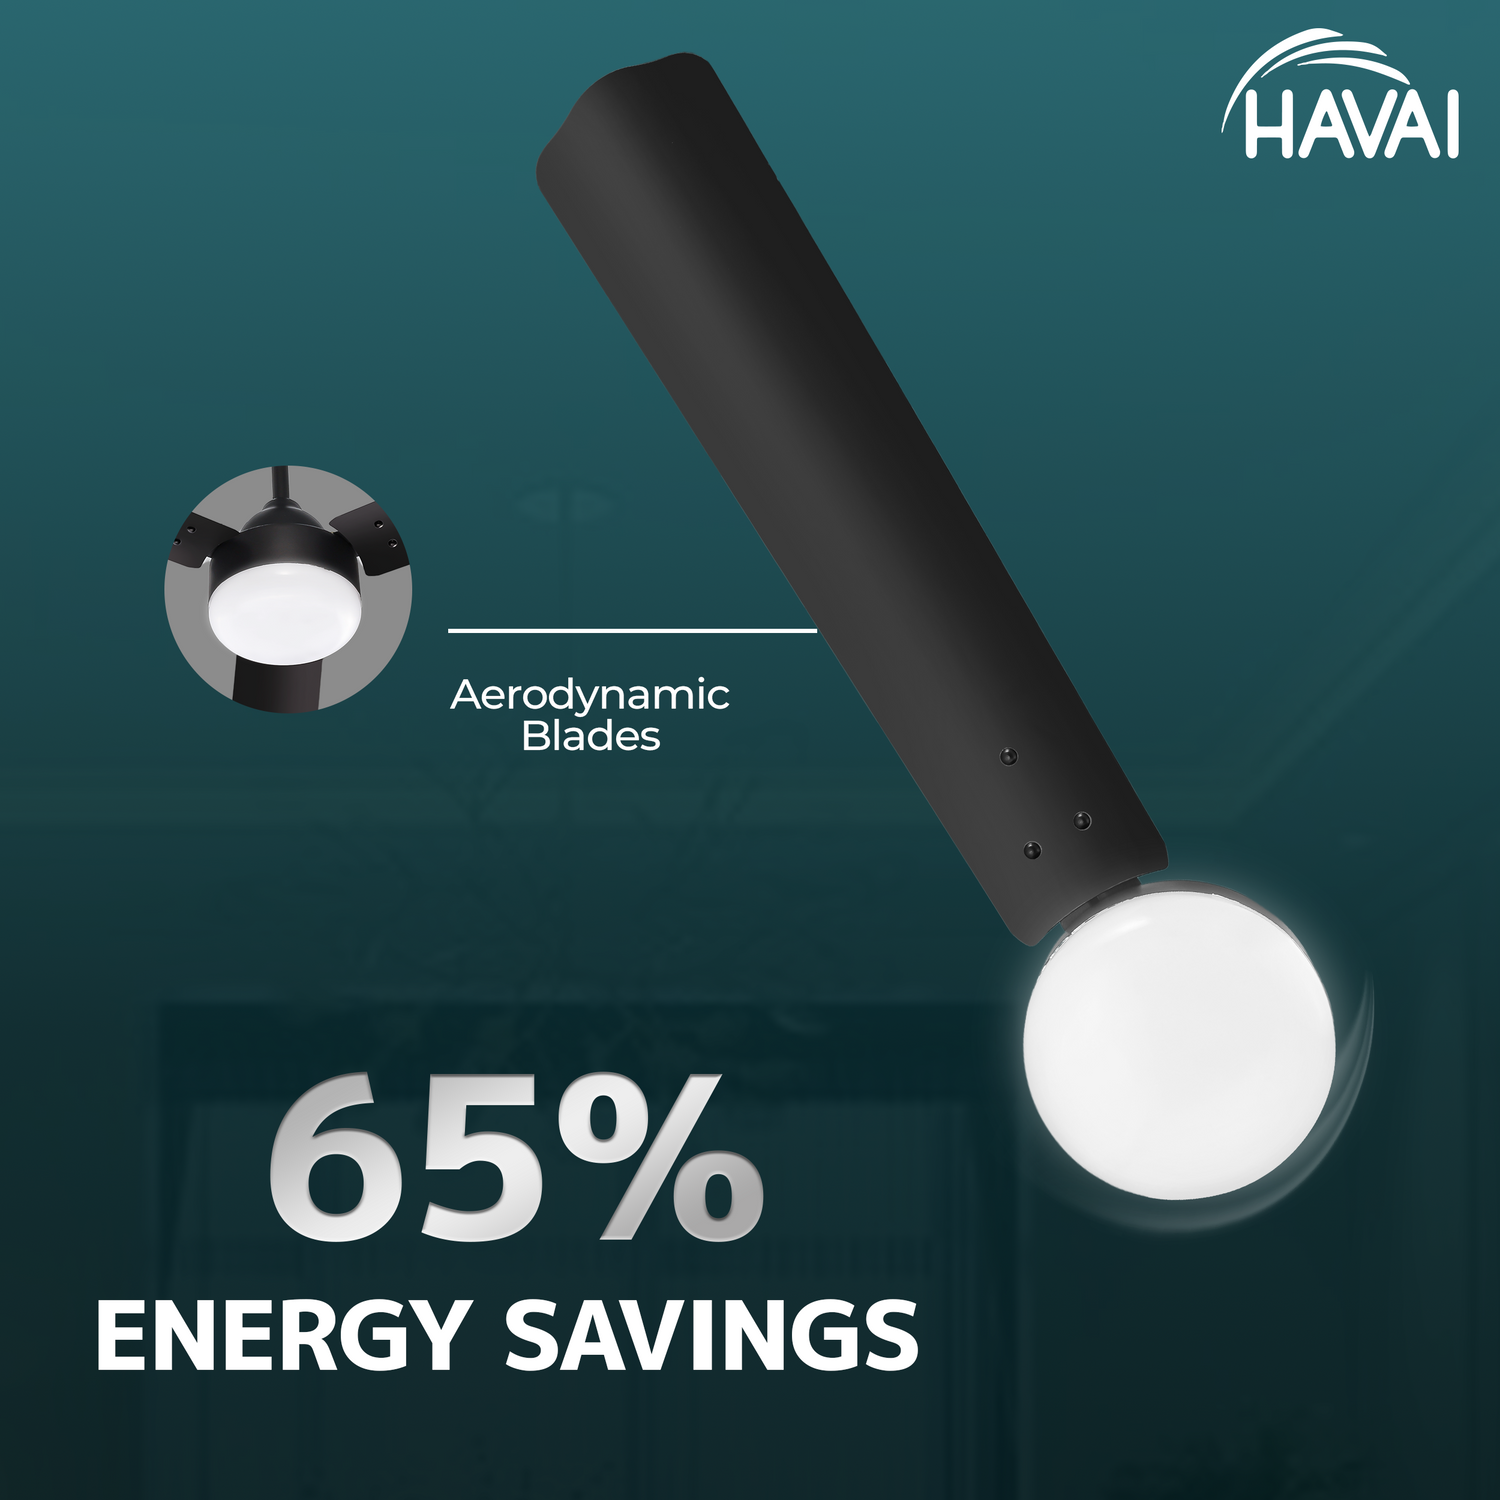 HAVAI Spinel BLDC Ceiling Fan 28W, 1200mm Blade with Remote - Smoky Brown, 0.5W LED